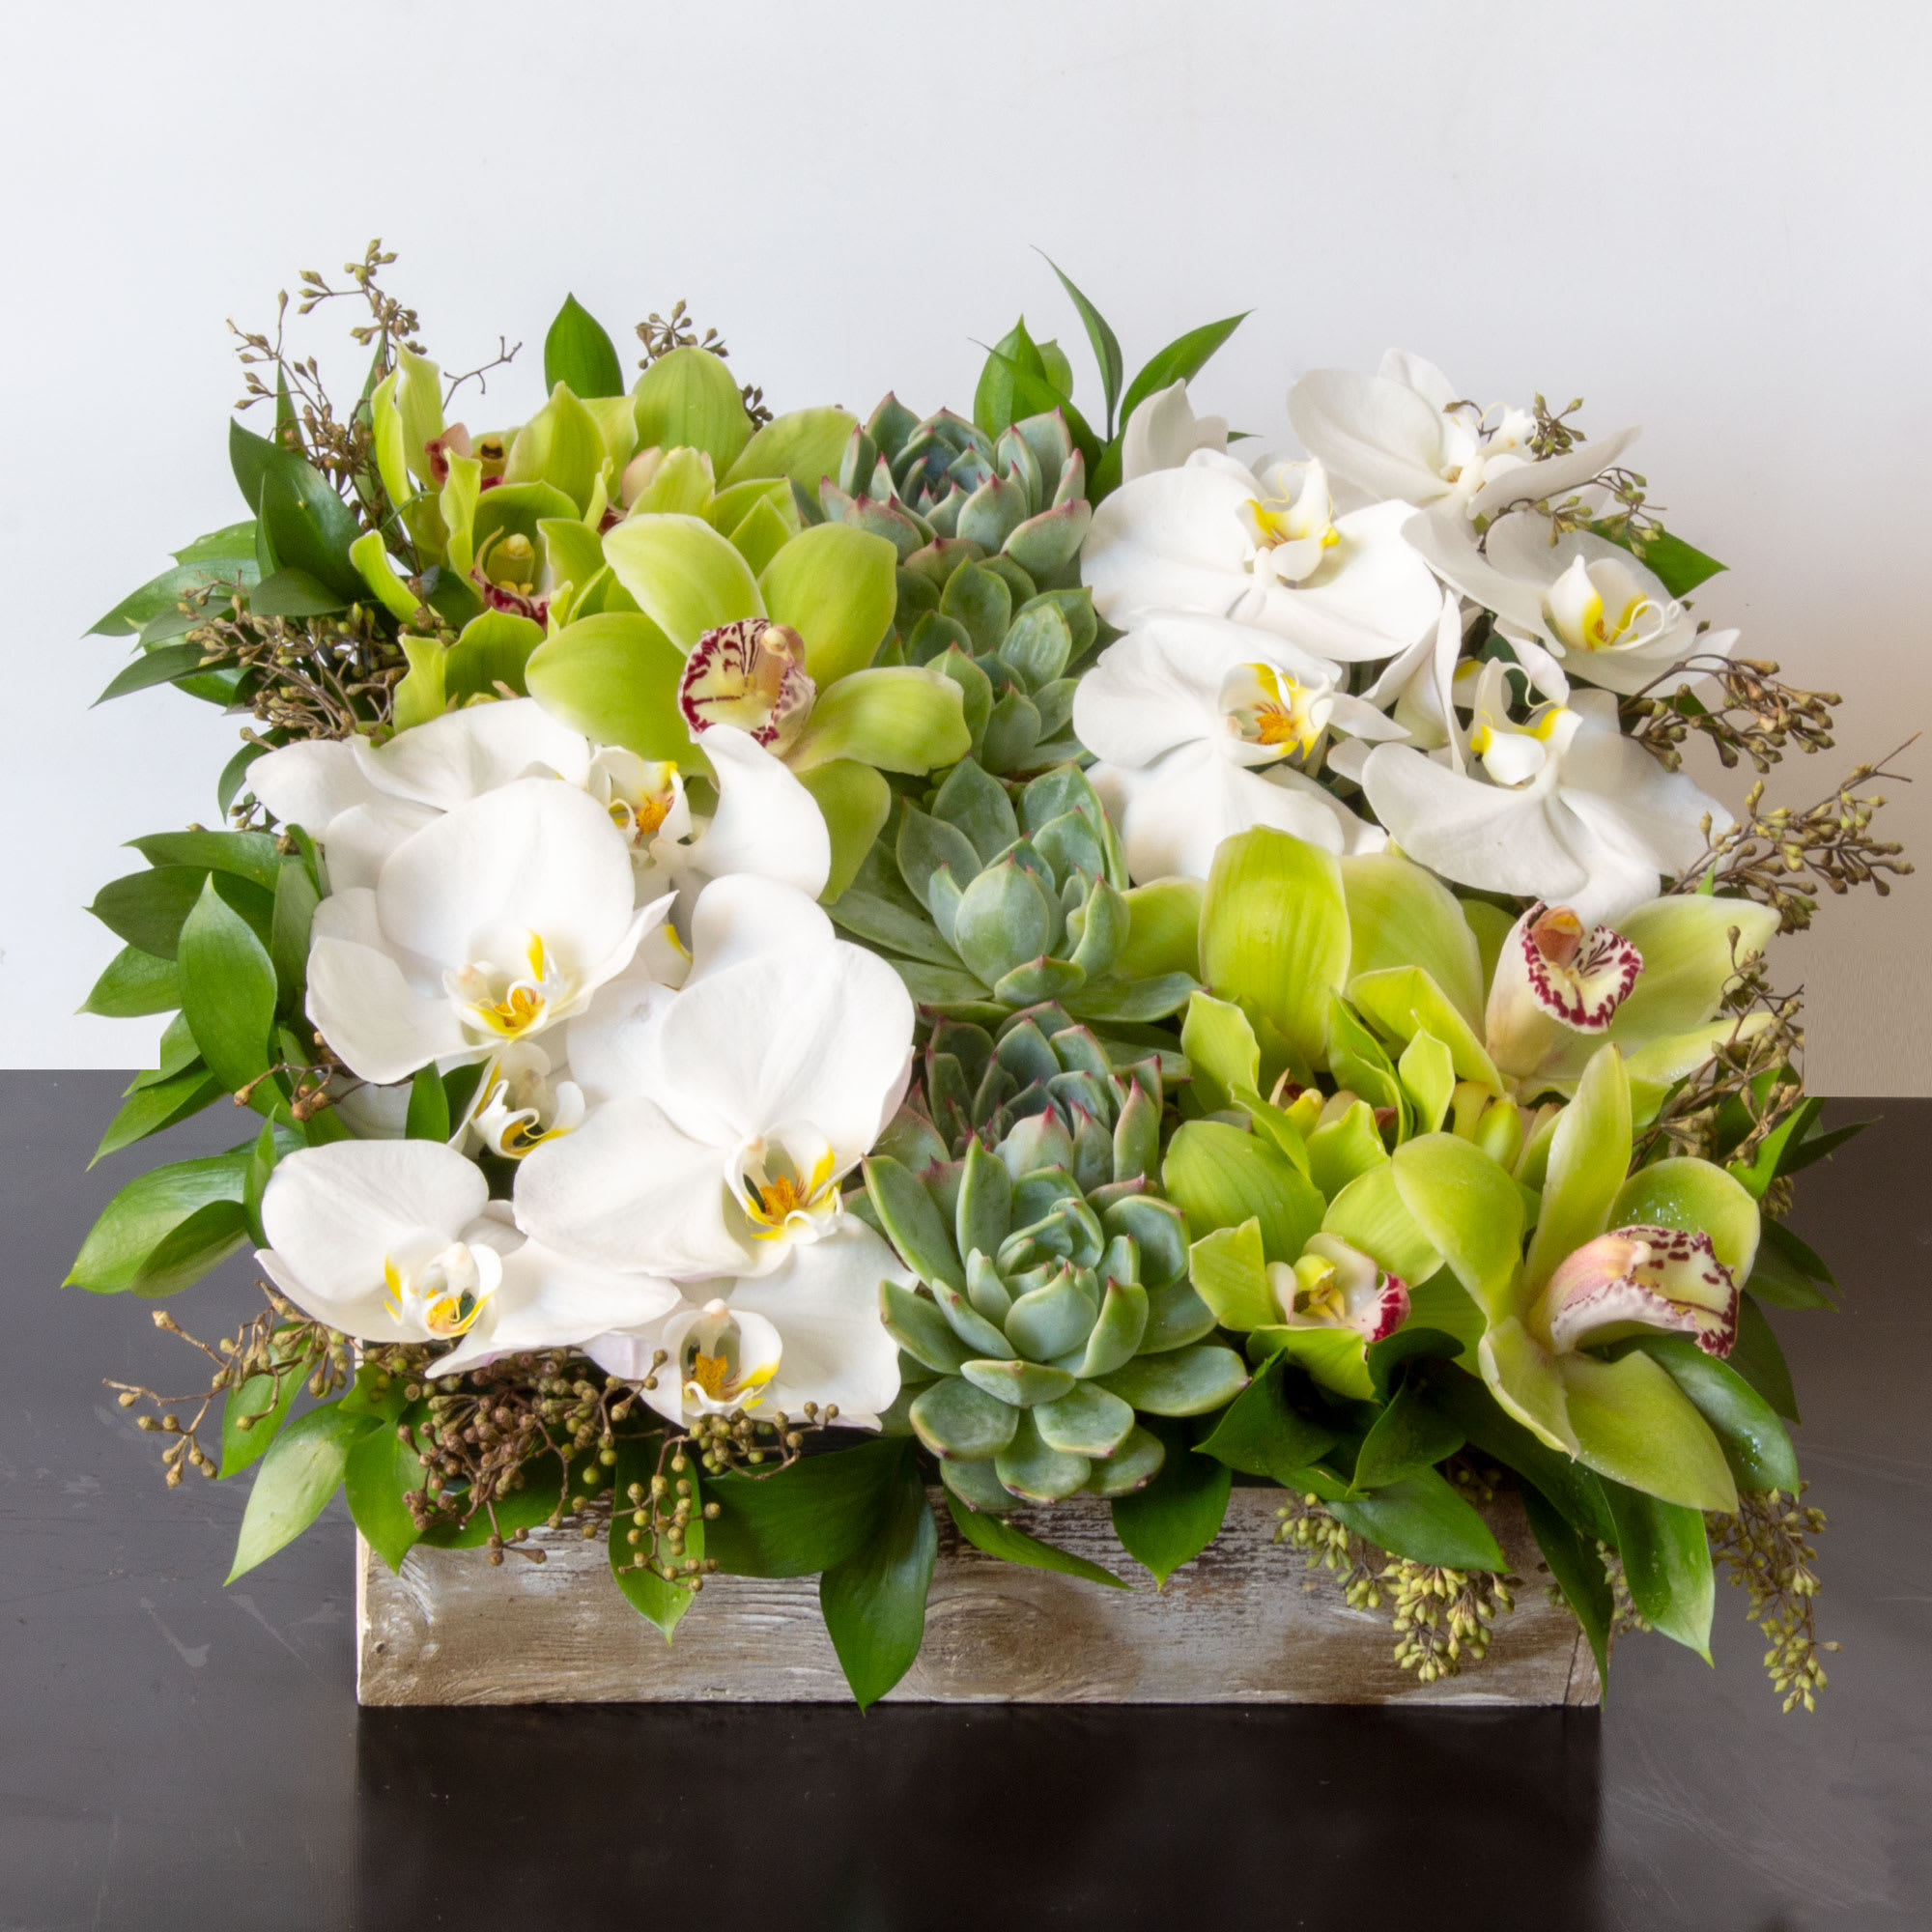 The Eternal Garden - The Eternal Garden is the perfect, practical gift. Show your special someone that your love is growing and vibrant. Our succulent garden comes with an array of lush desert beauties in a wood textured box flanked by Phalaenopsis and Cymbidium Orchids.  standard. 12 x 12 box   Deluxe. 24 X 24 Box